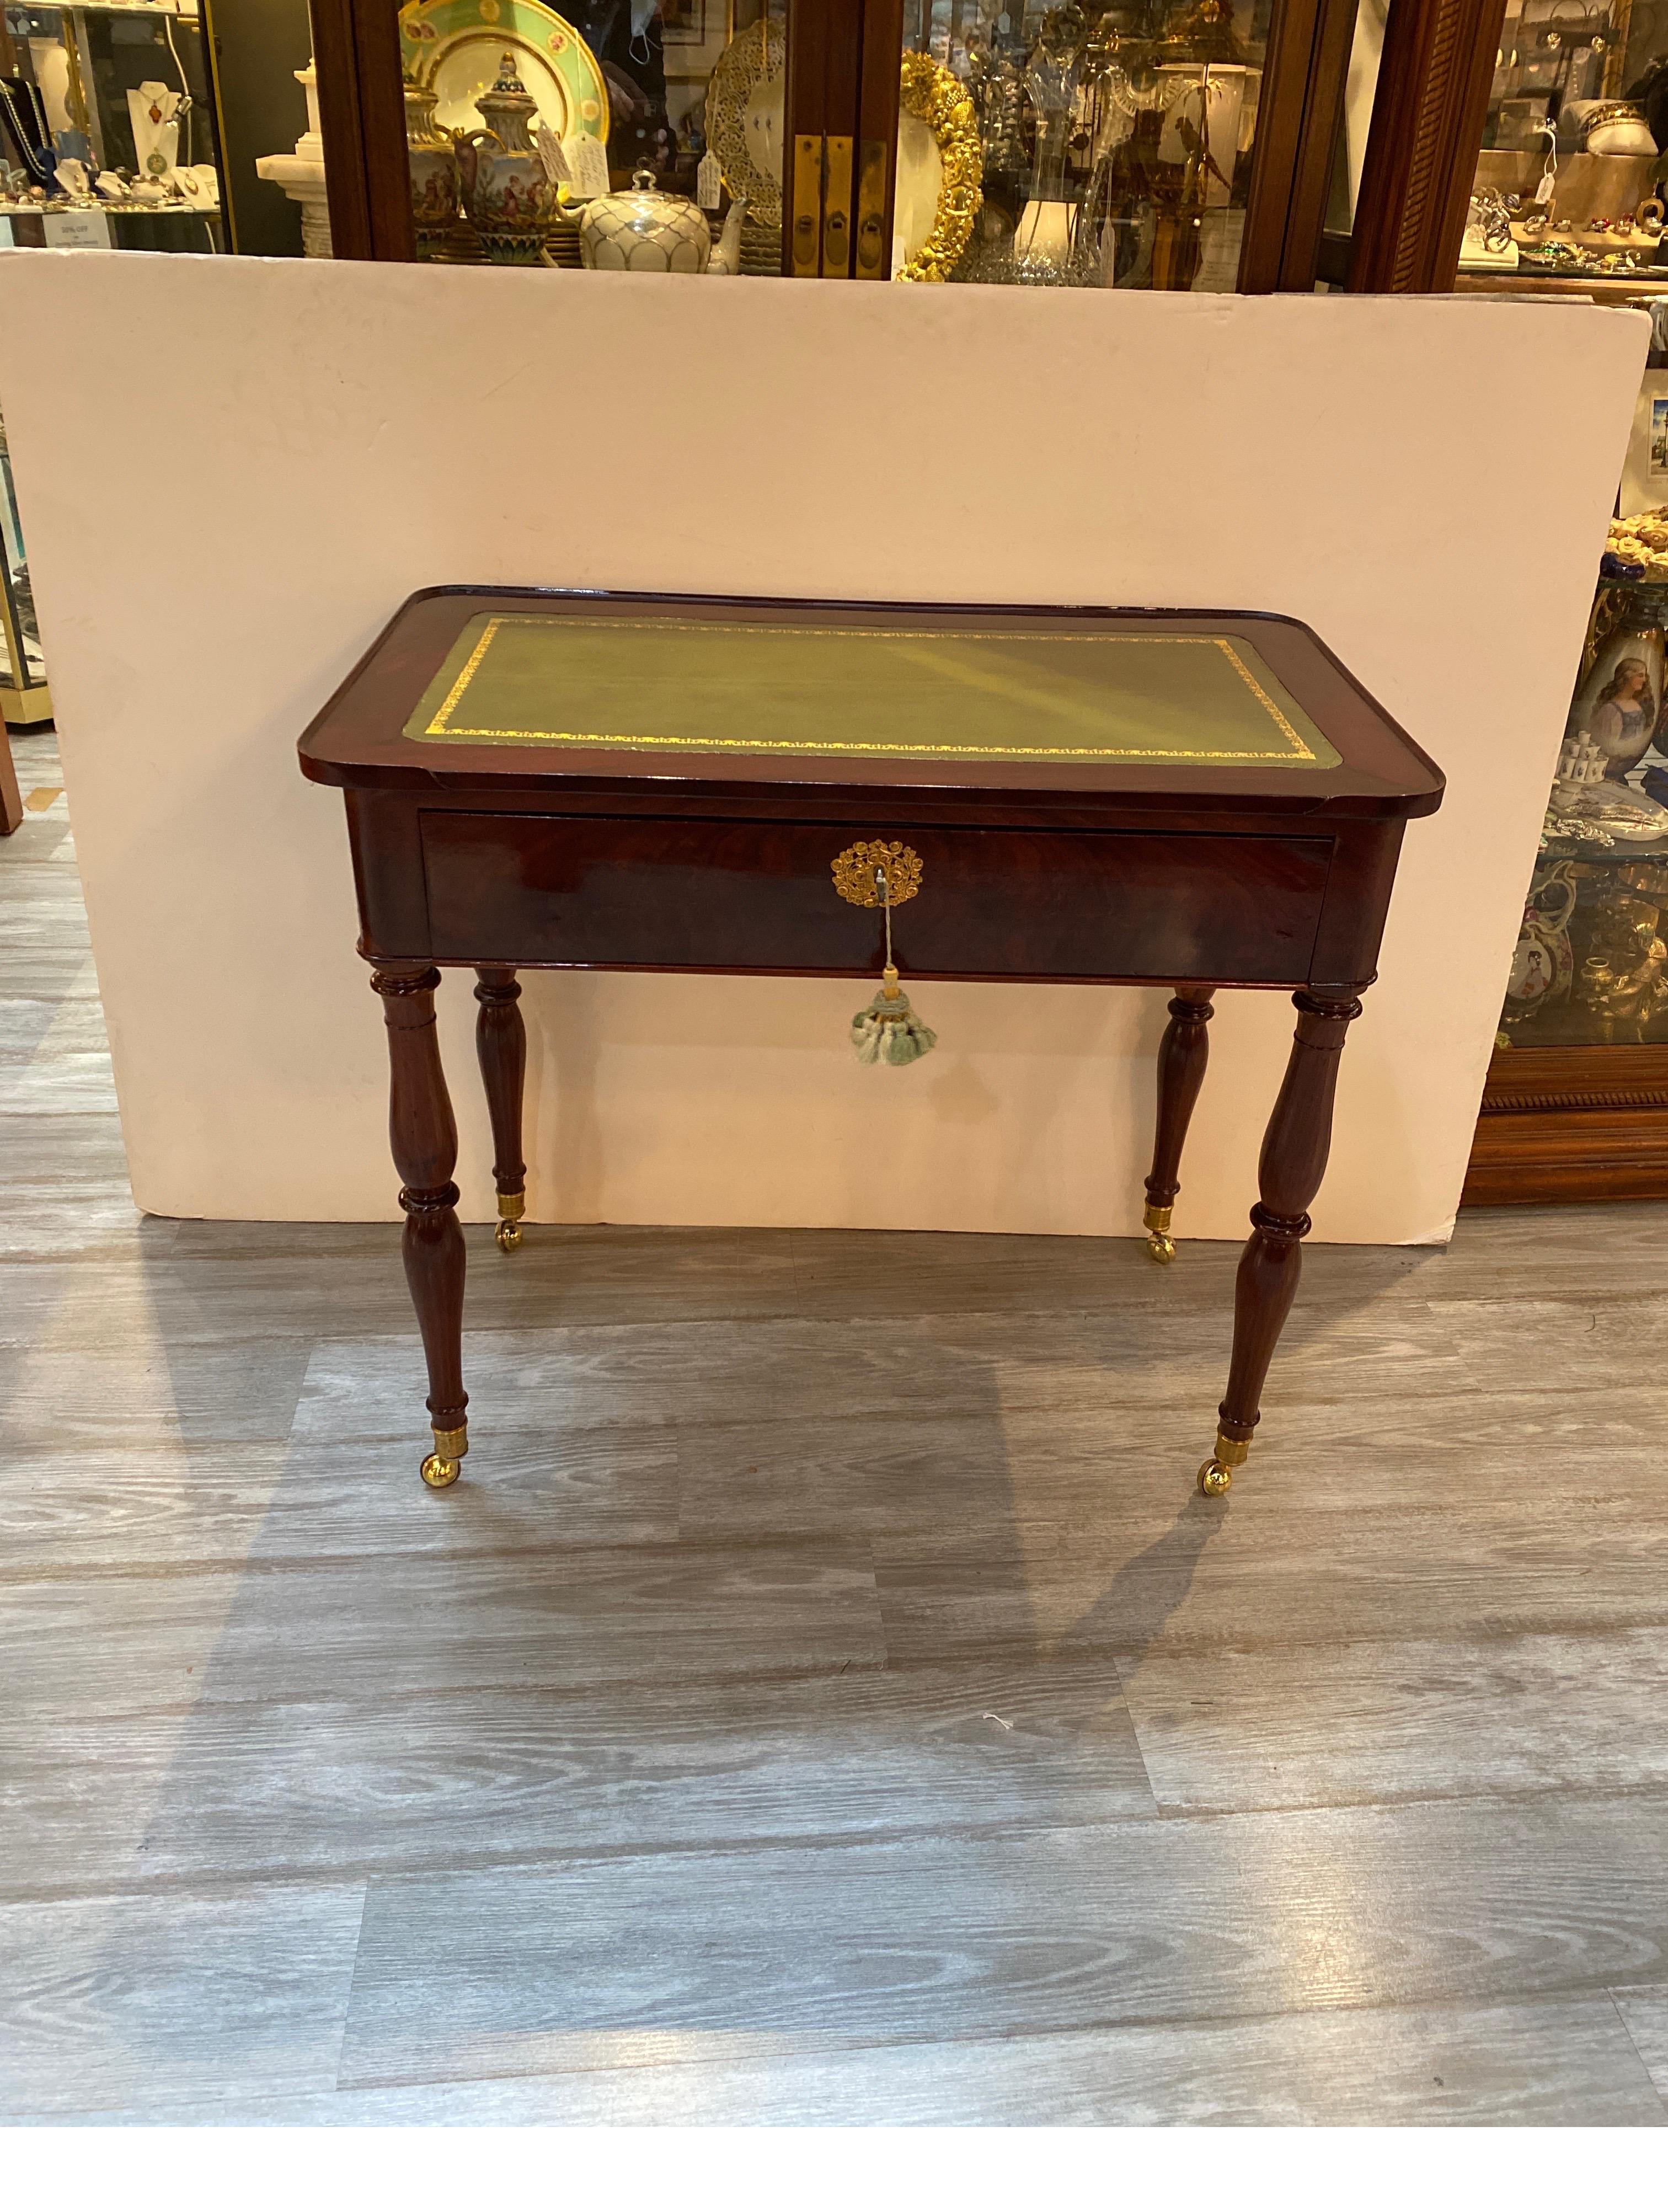 An elegant mahogany diminutive console deask with olive leather top. The retangular top with gilt tooled edge with central drawer with key, resting on four sold wood turned legs. 32.25 inches wide, 19 inches deep, 29.5 inches tall.